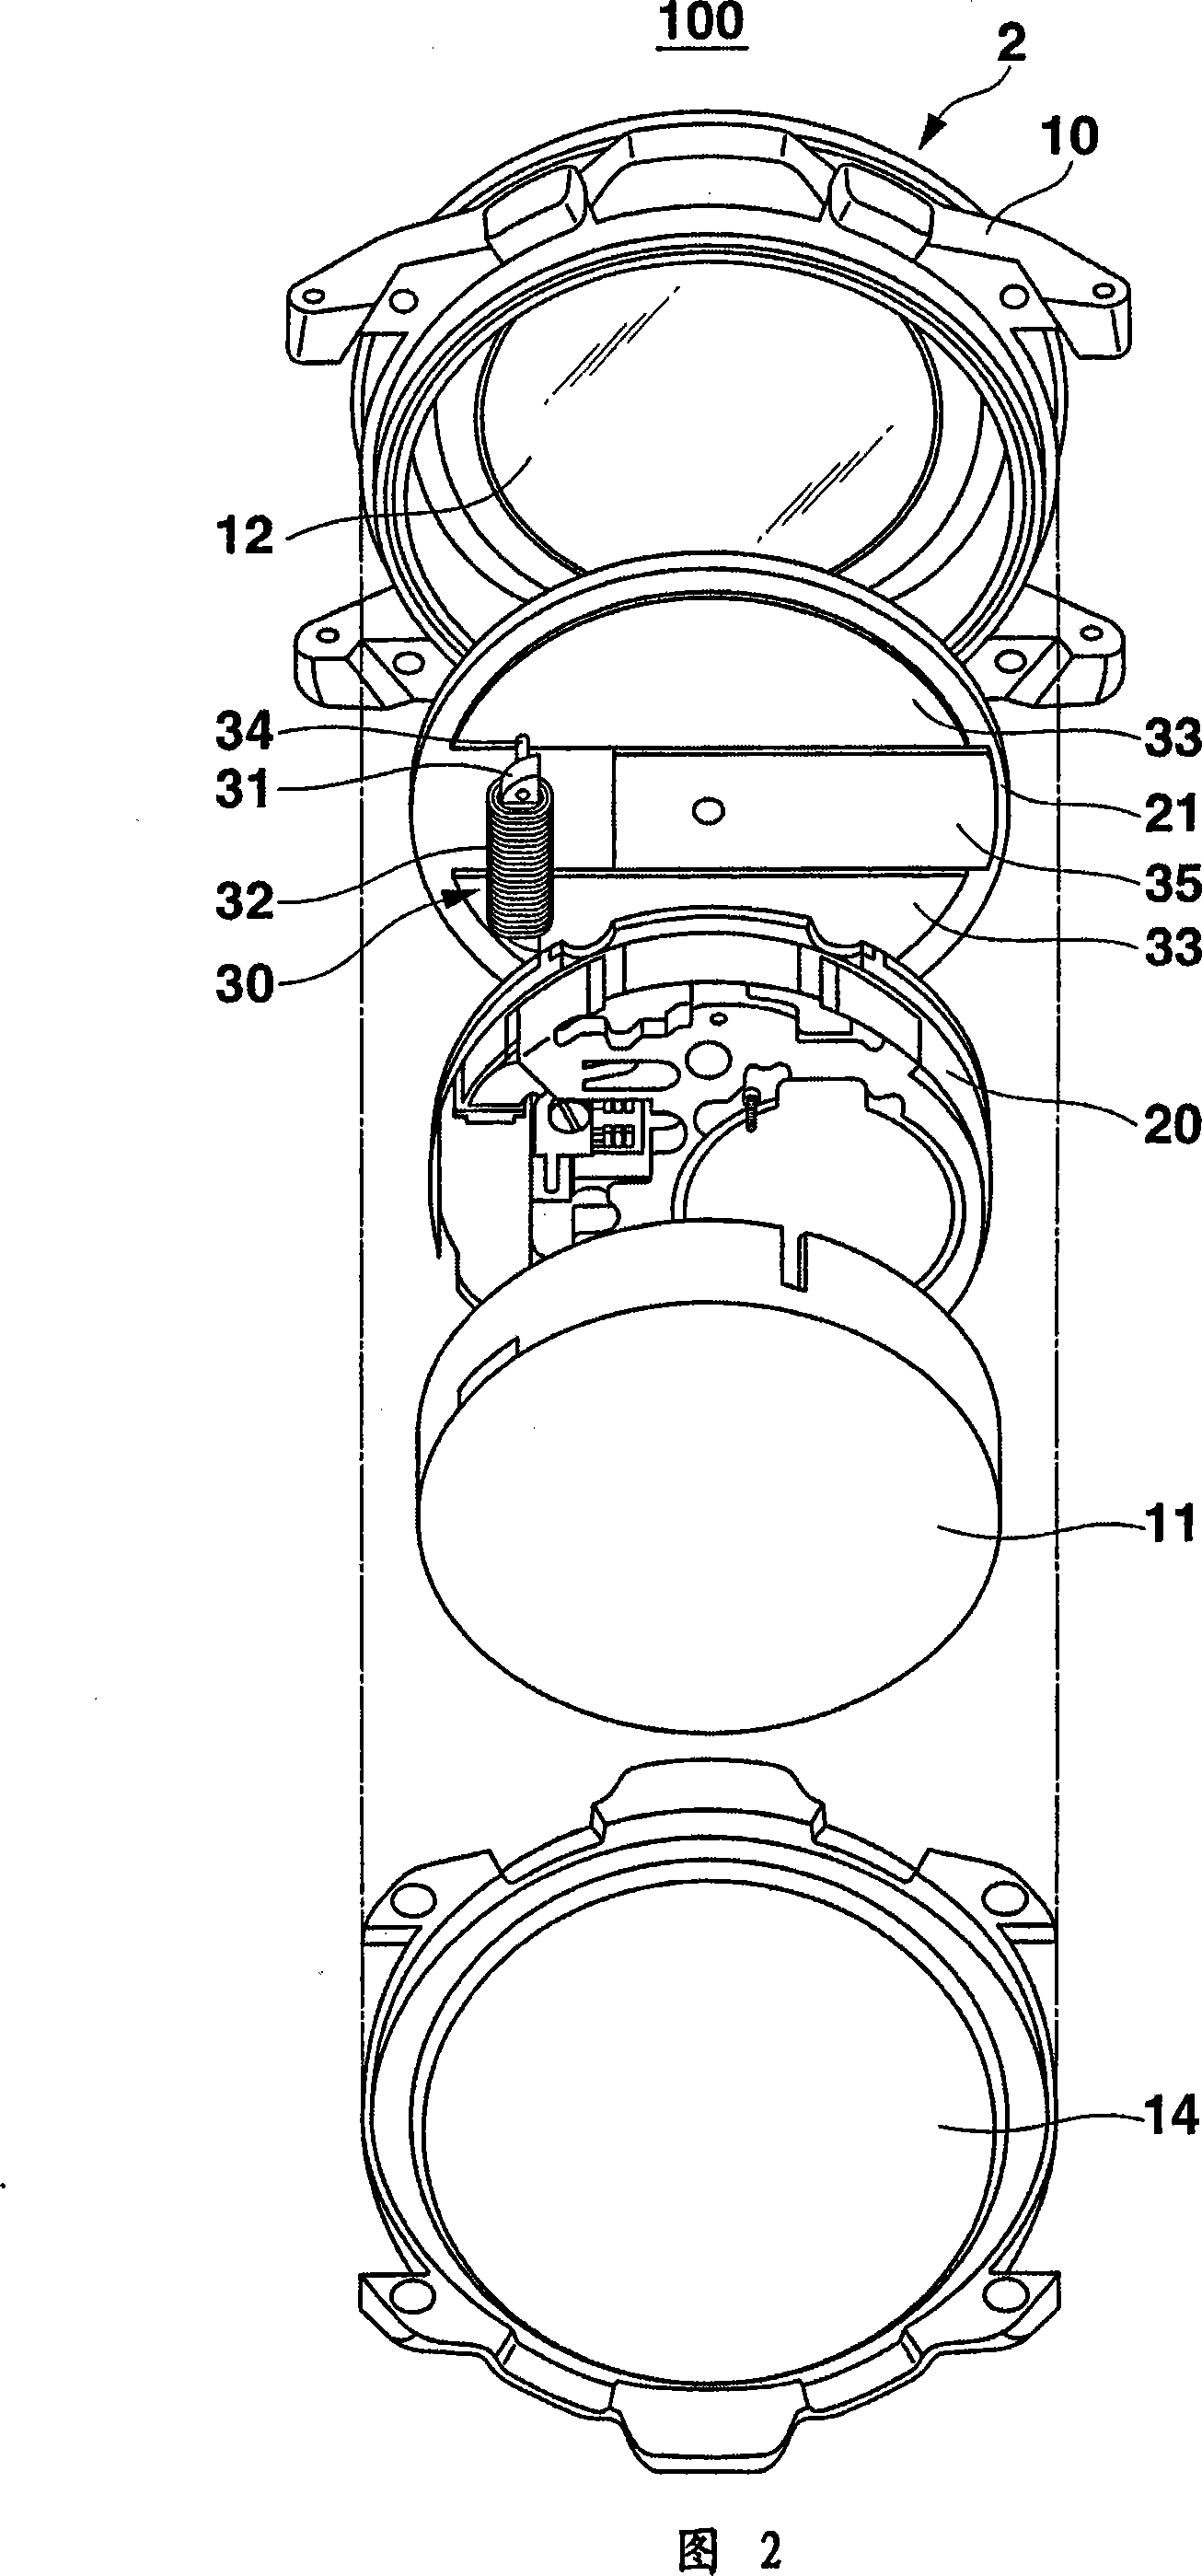 Electronic apparatus and timepiece